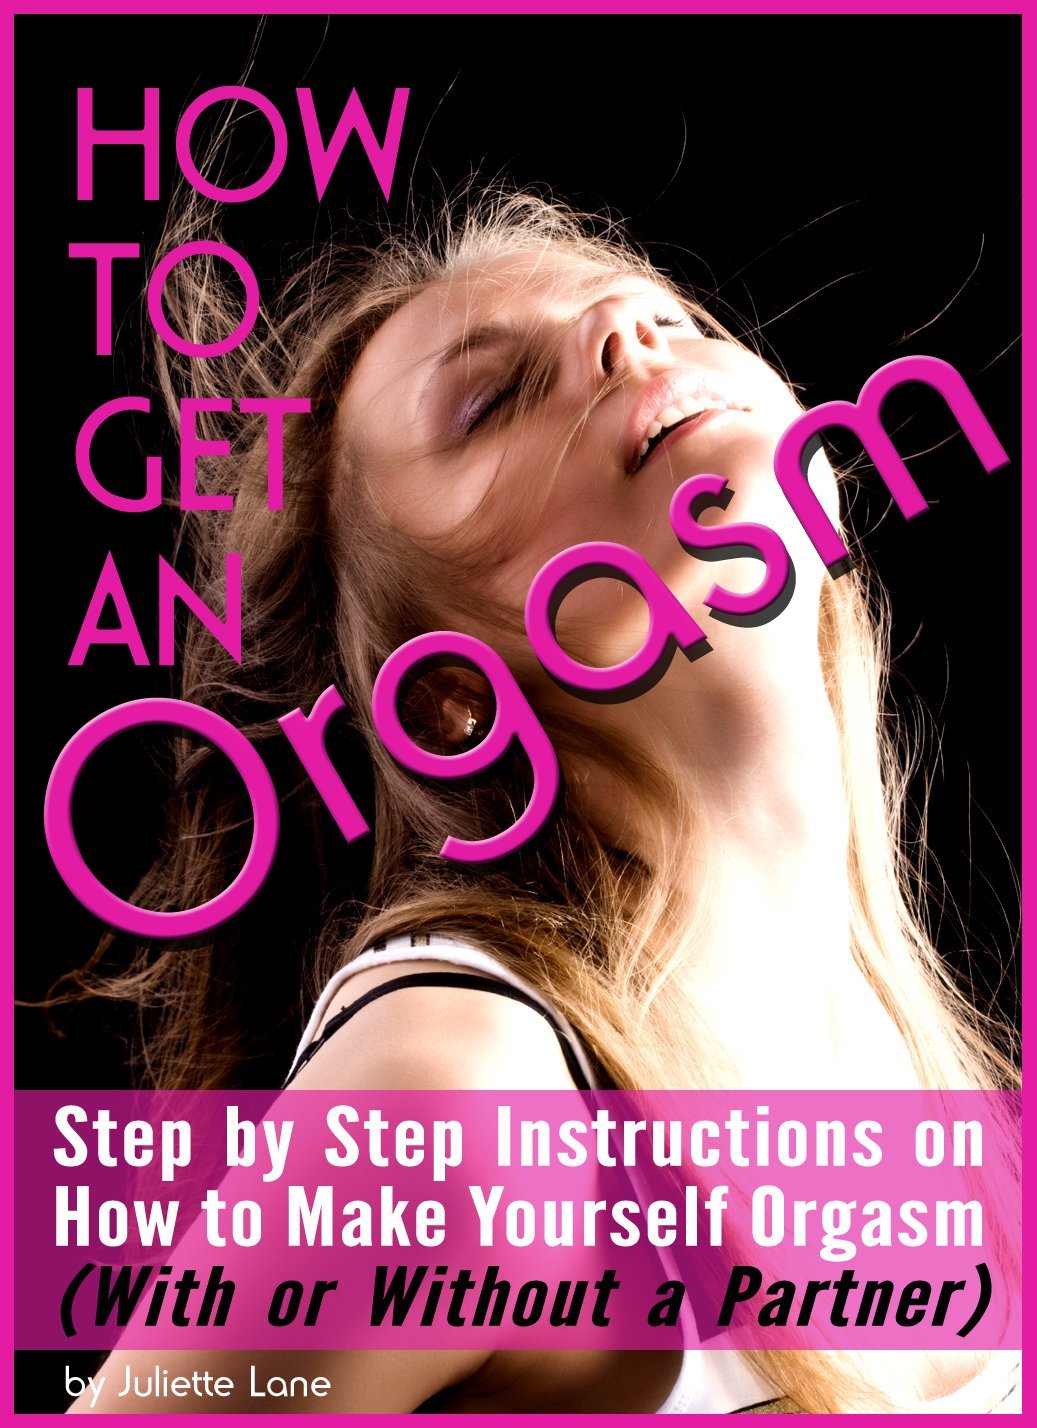 FREE: How to Get an Orgasm: Step by Step Instructions on How to Make Yourself Orgasm by Juliette Lane